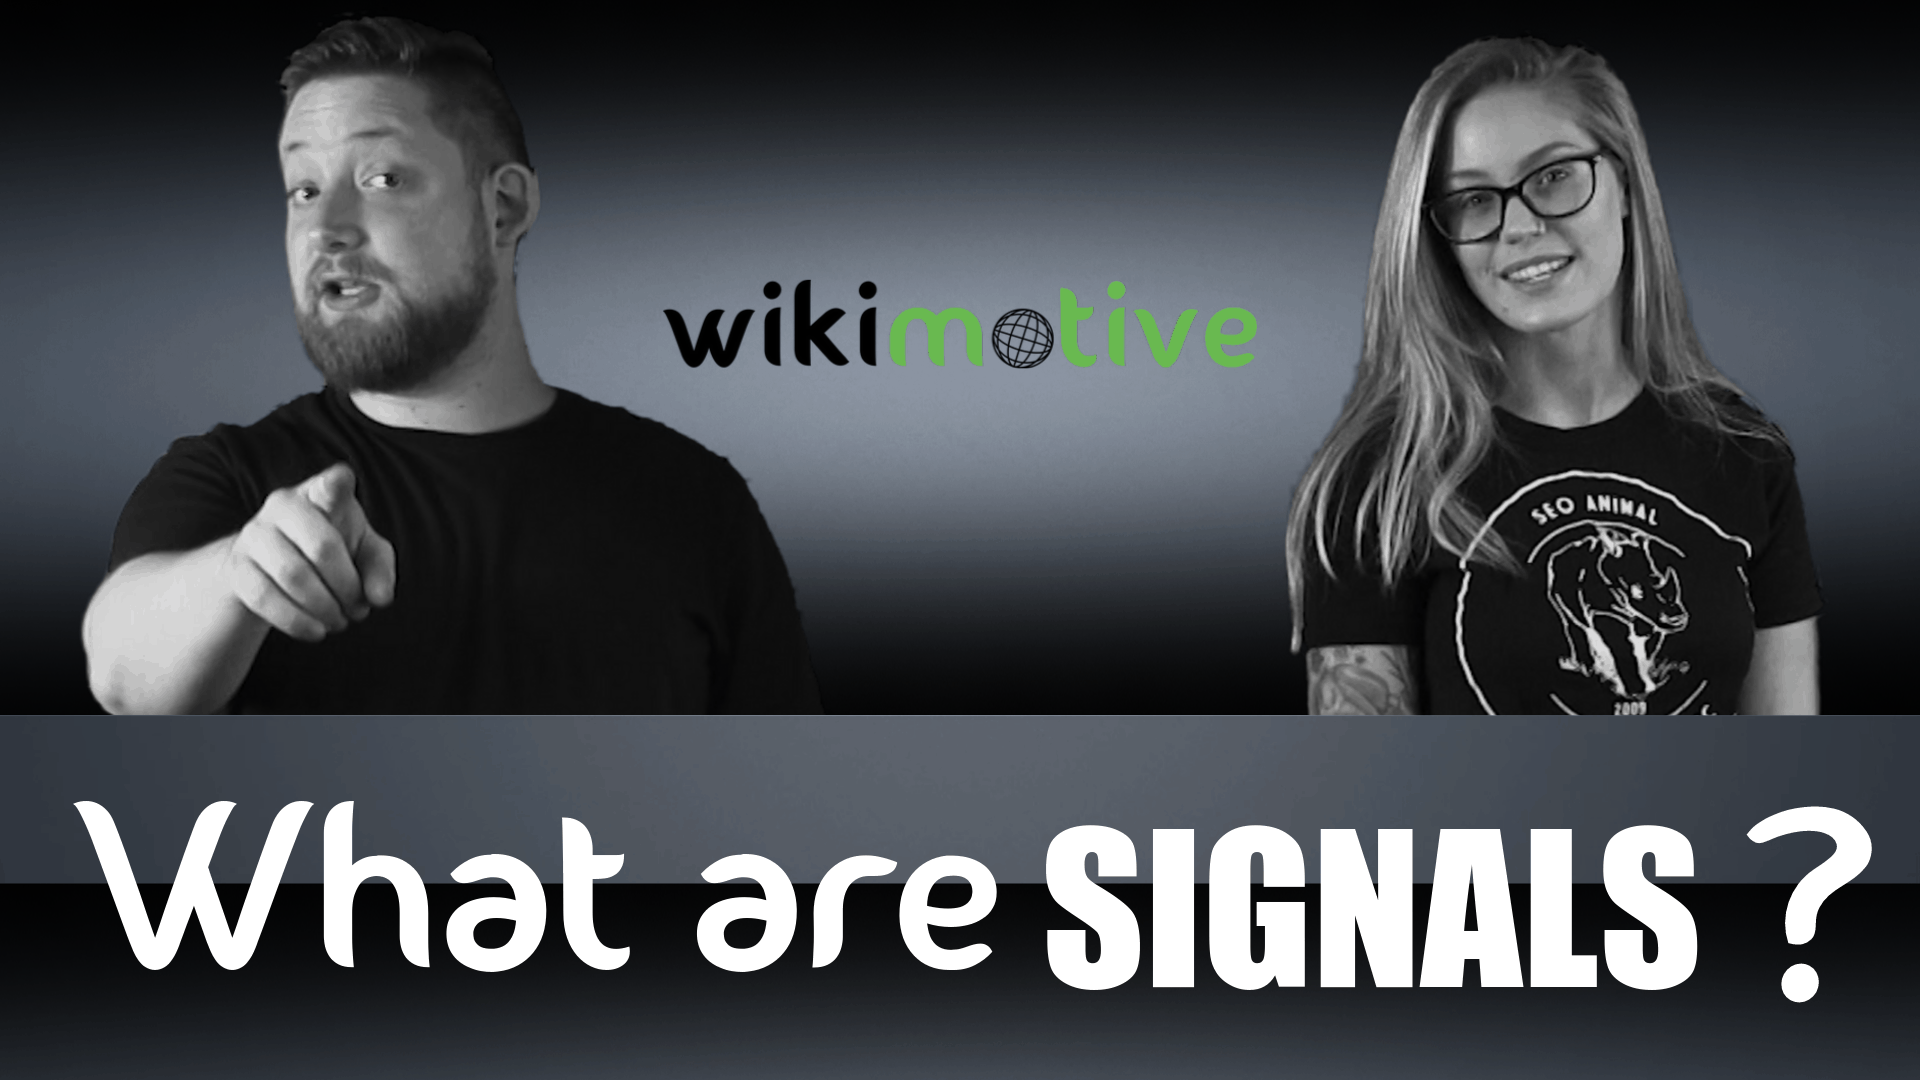 Just the Tip – What Are “Signals”?